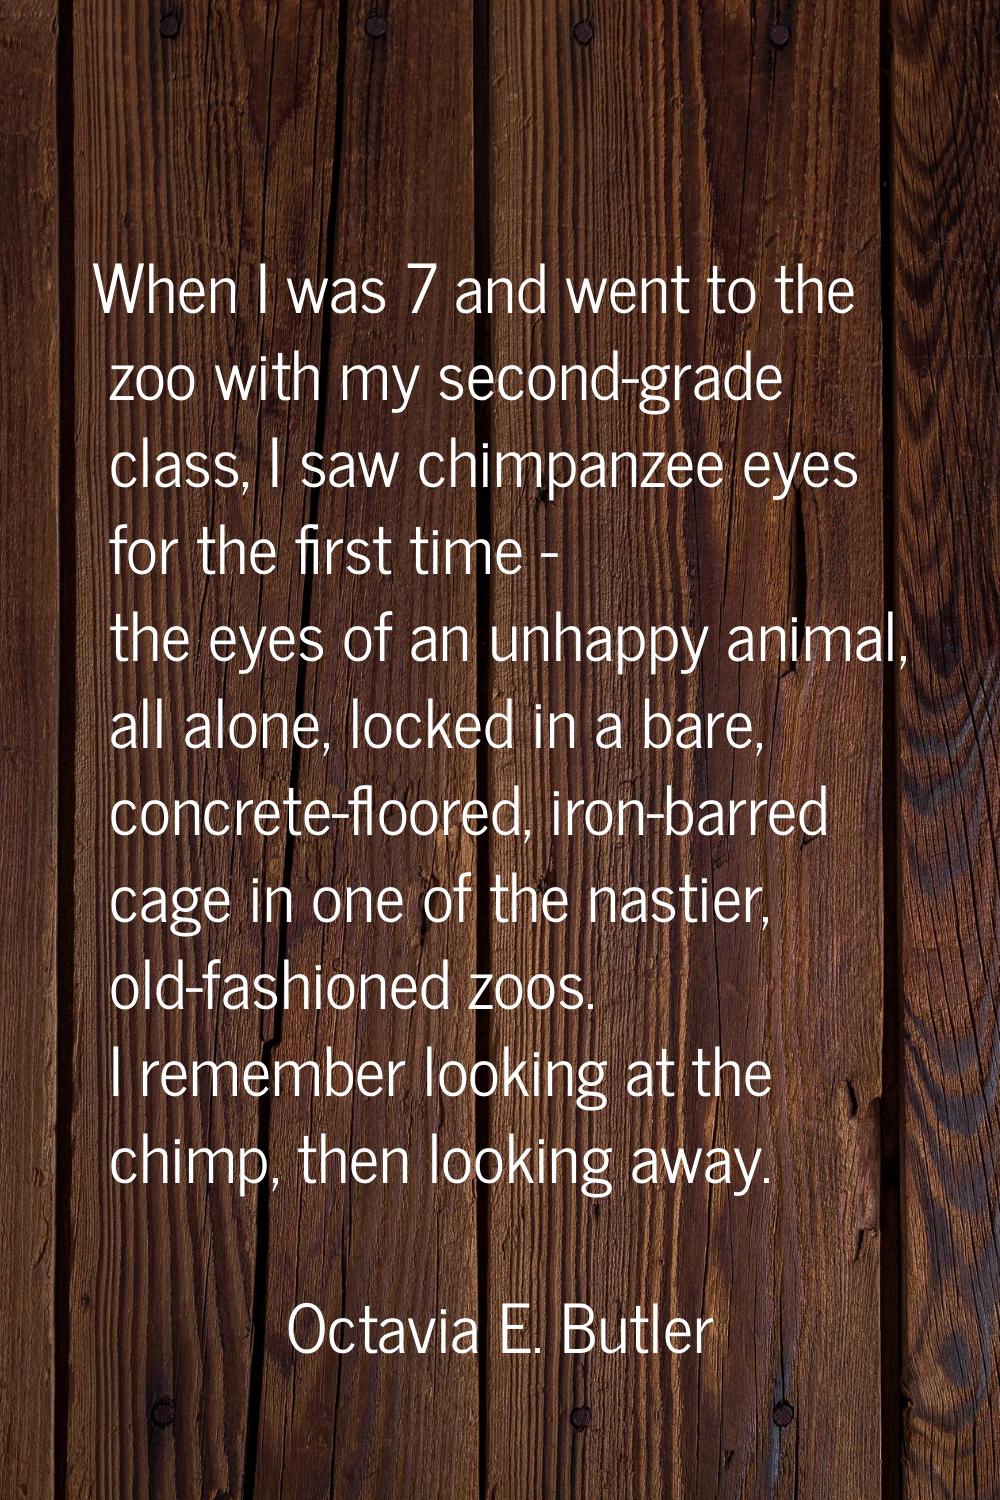 When I was 7 and went to the zoo with my second-grade class, I saw chimpanzee eyes for the first ti